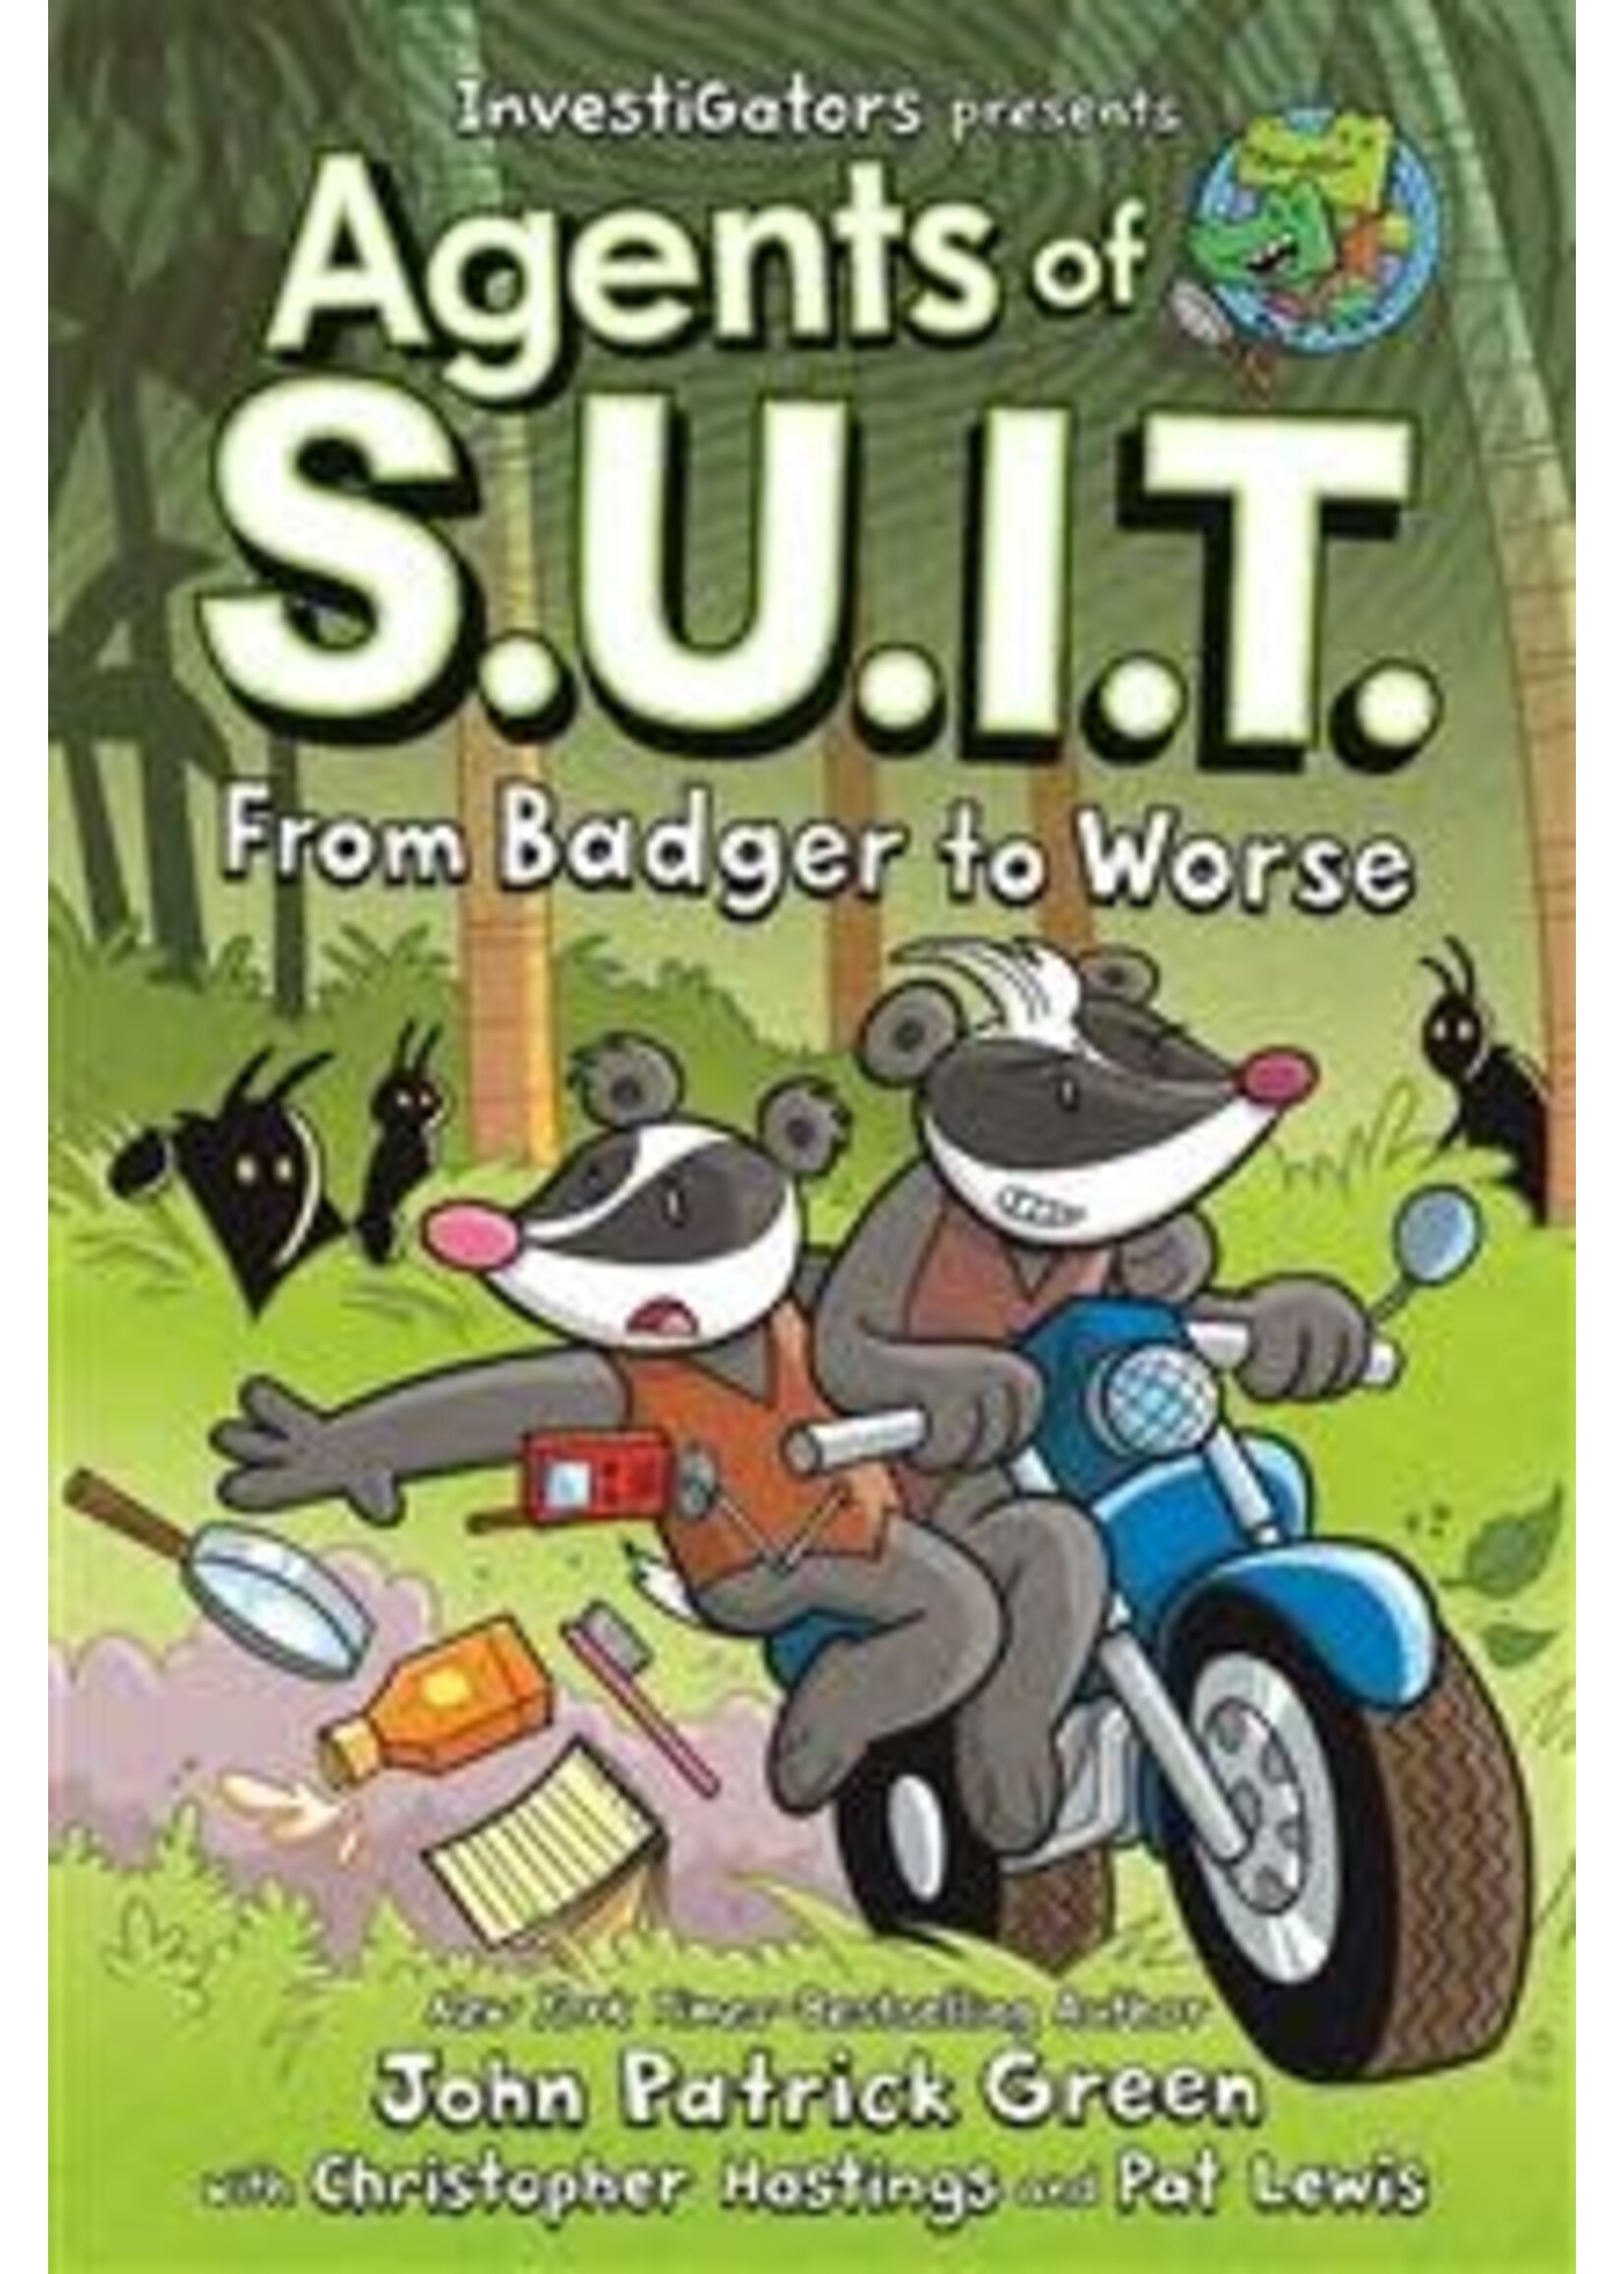 From Badger to Worse (Agents of S.U.I.T. #2) by John Patrick Green, Christopher Hastings, Pat Lewis